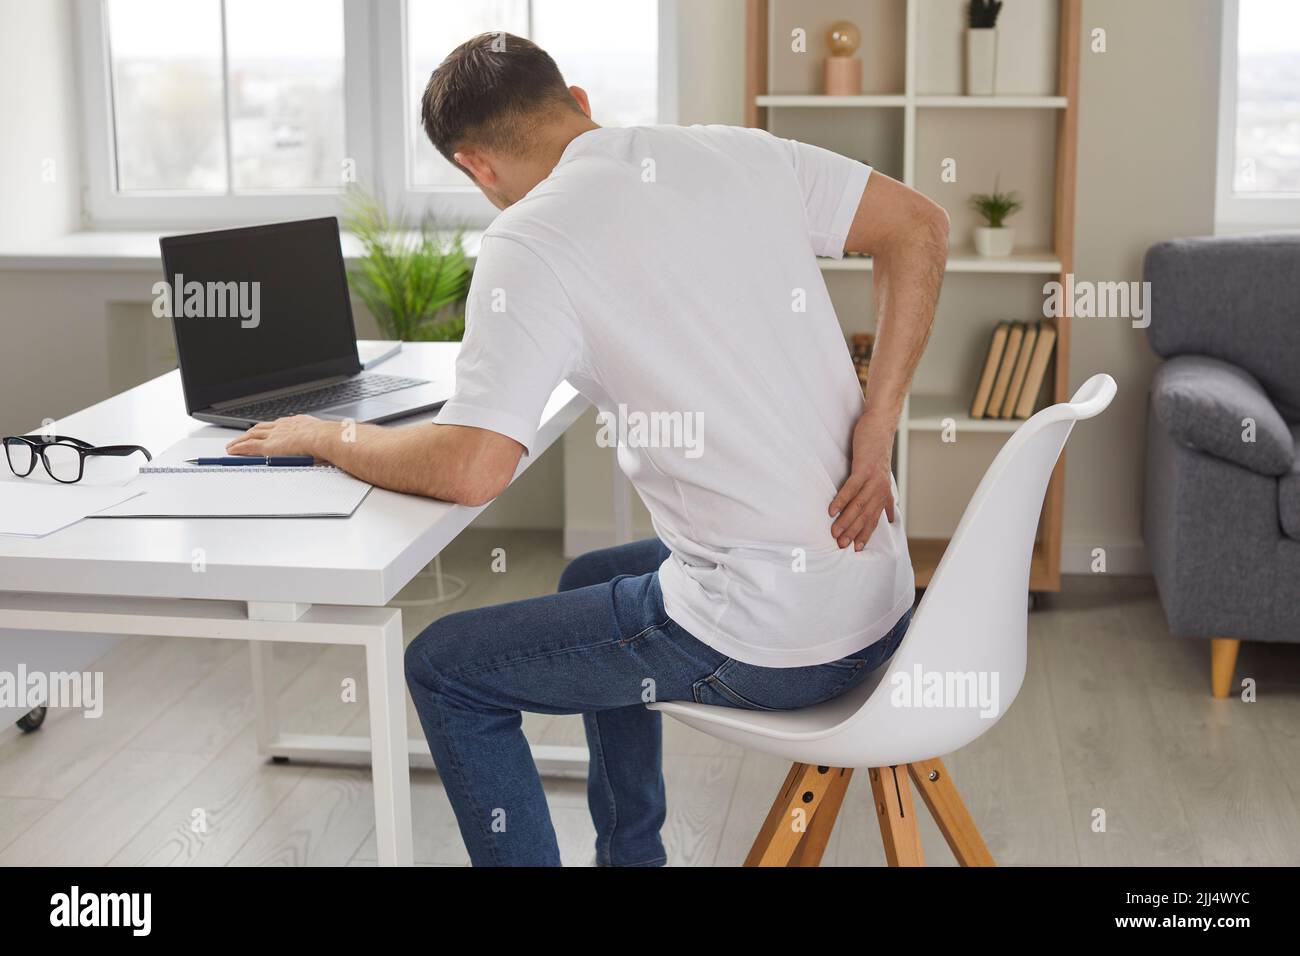 Man experiences severe back pain caused by prolonged and incorrect sitting at workplace. Stock Photo